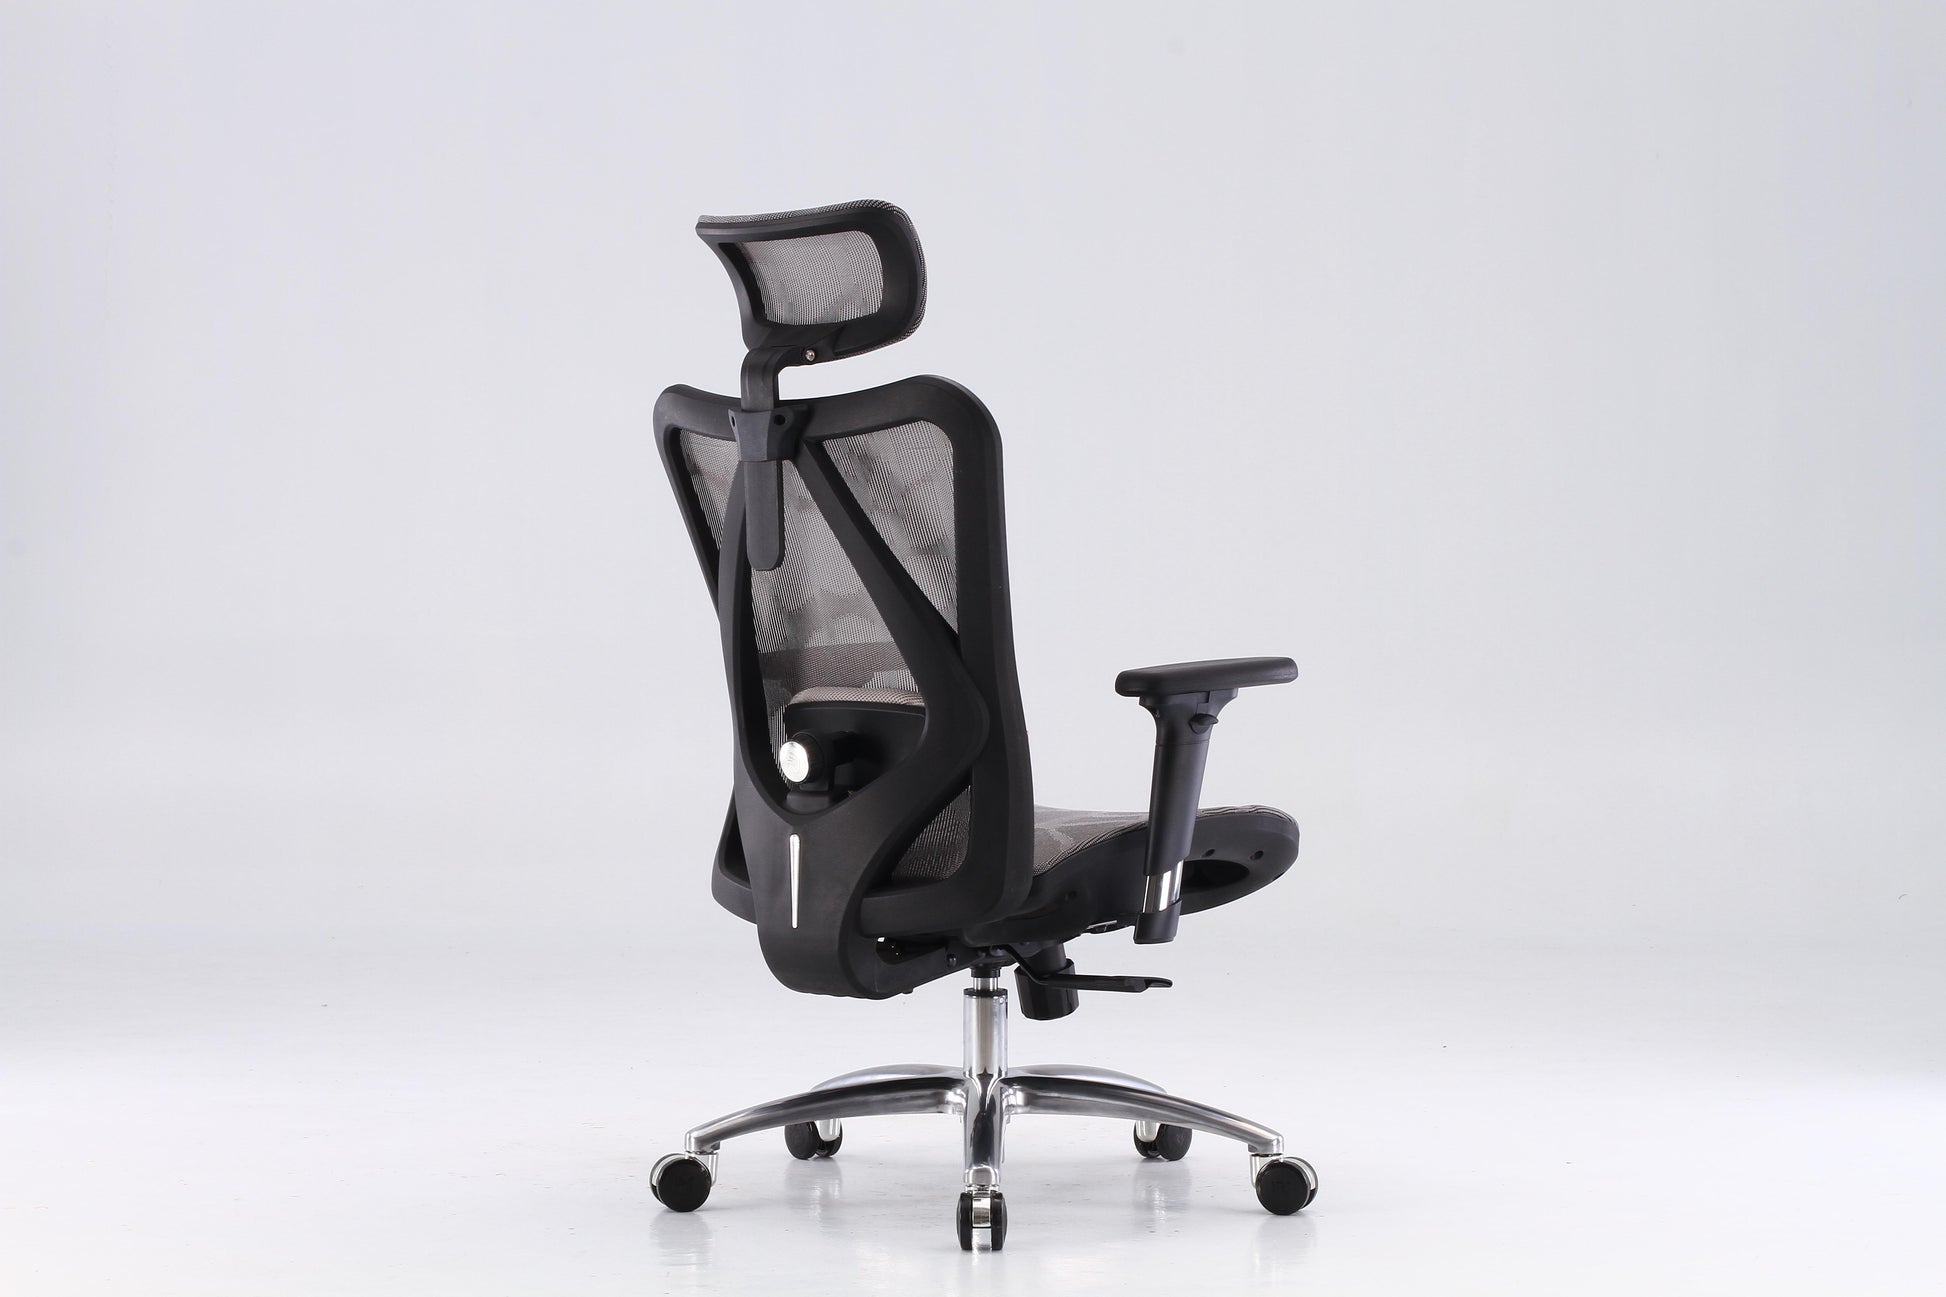 Sihoo M57 Full Mesh Breathable Office Chair for Sedentary Lifestyle